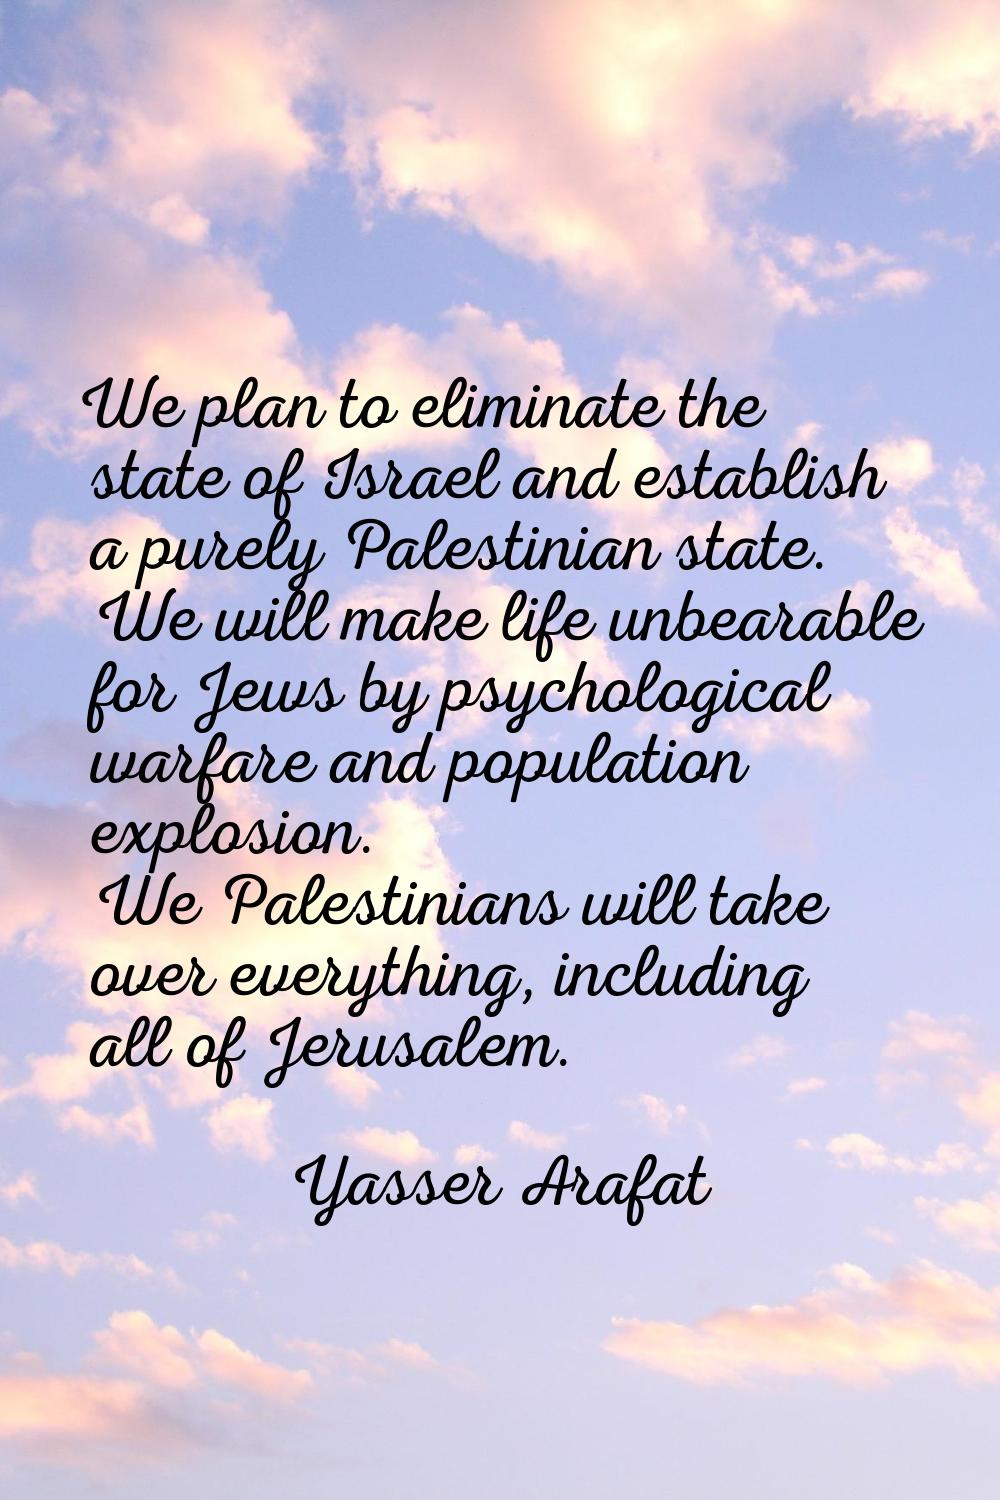 We plan to eliminate the state of Israel and establish a purely Palestinian state. We will make lif